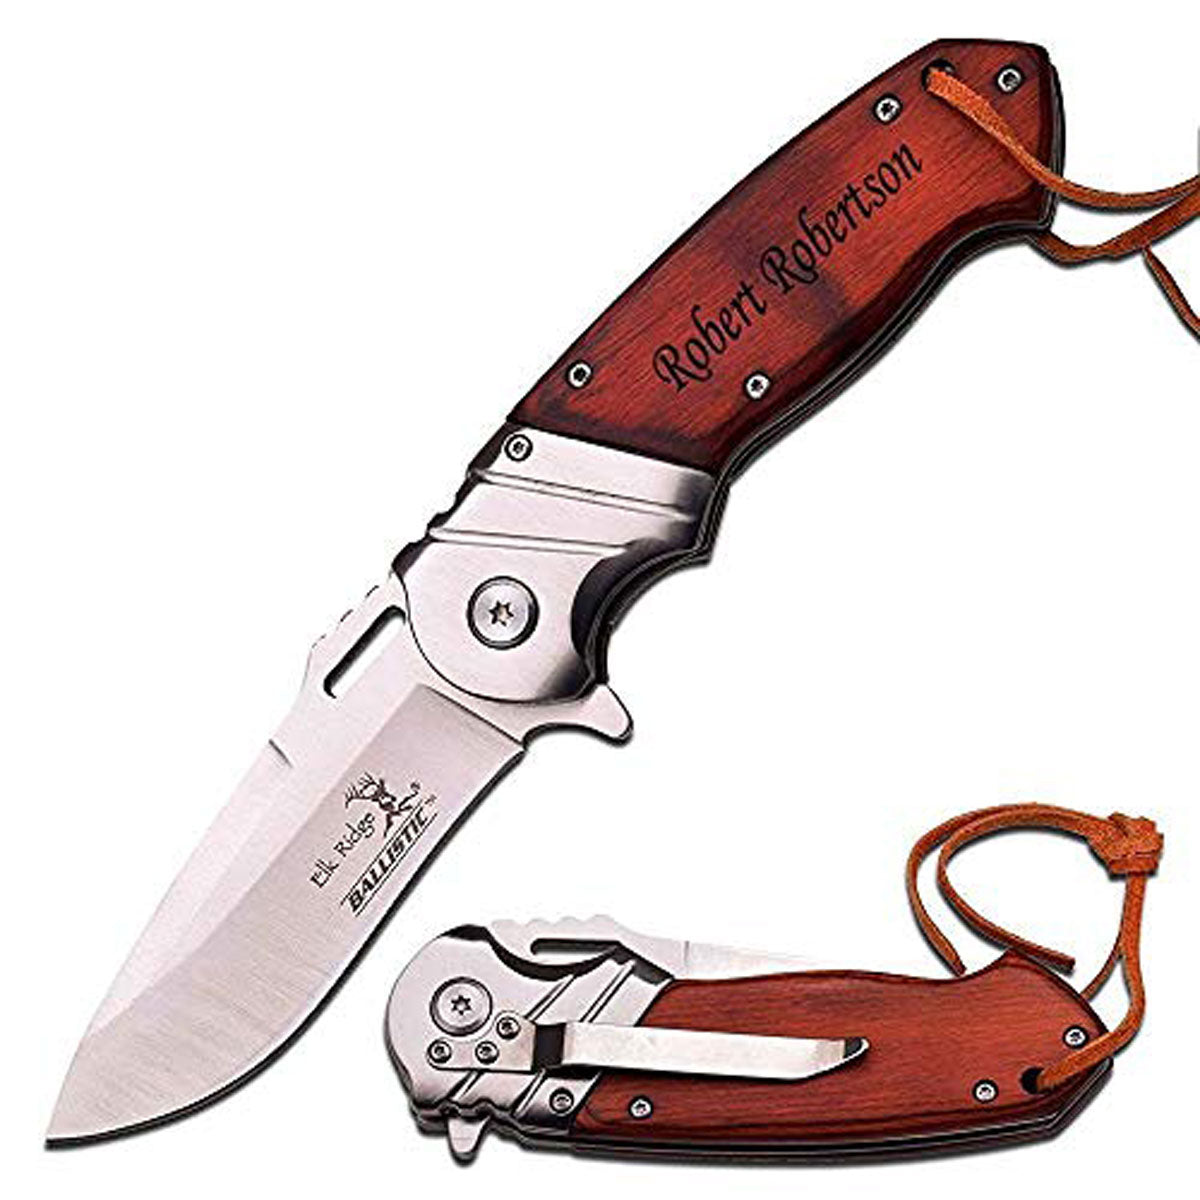 GIFTS INFINITY Personalized Laser Engraved Folding Knife, Brown Pakkawood Open Assisted Knife 4.75" Closed